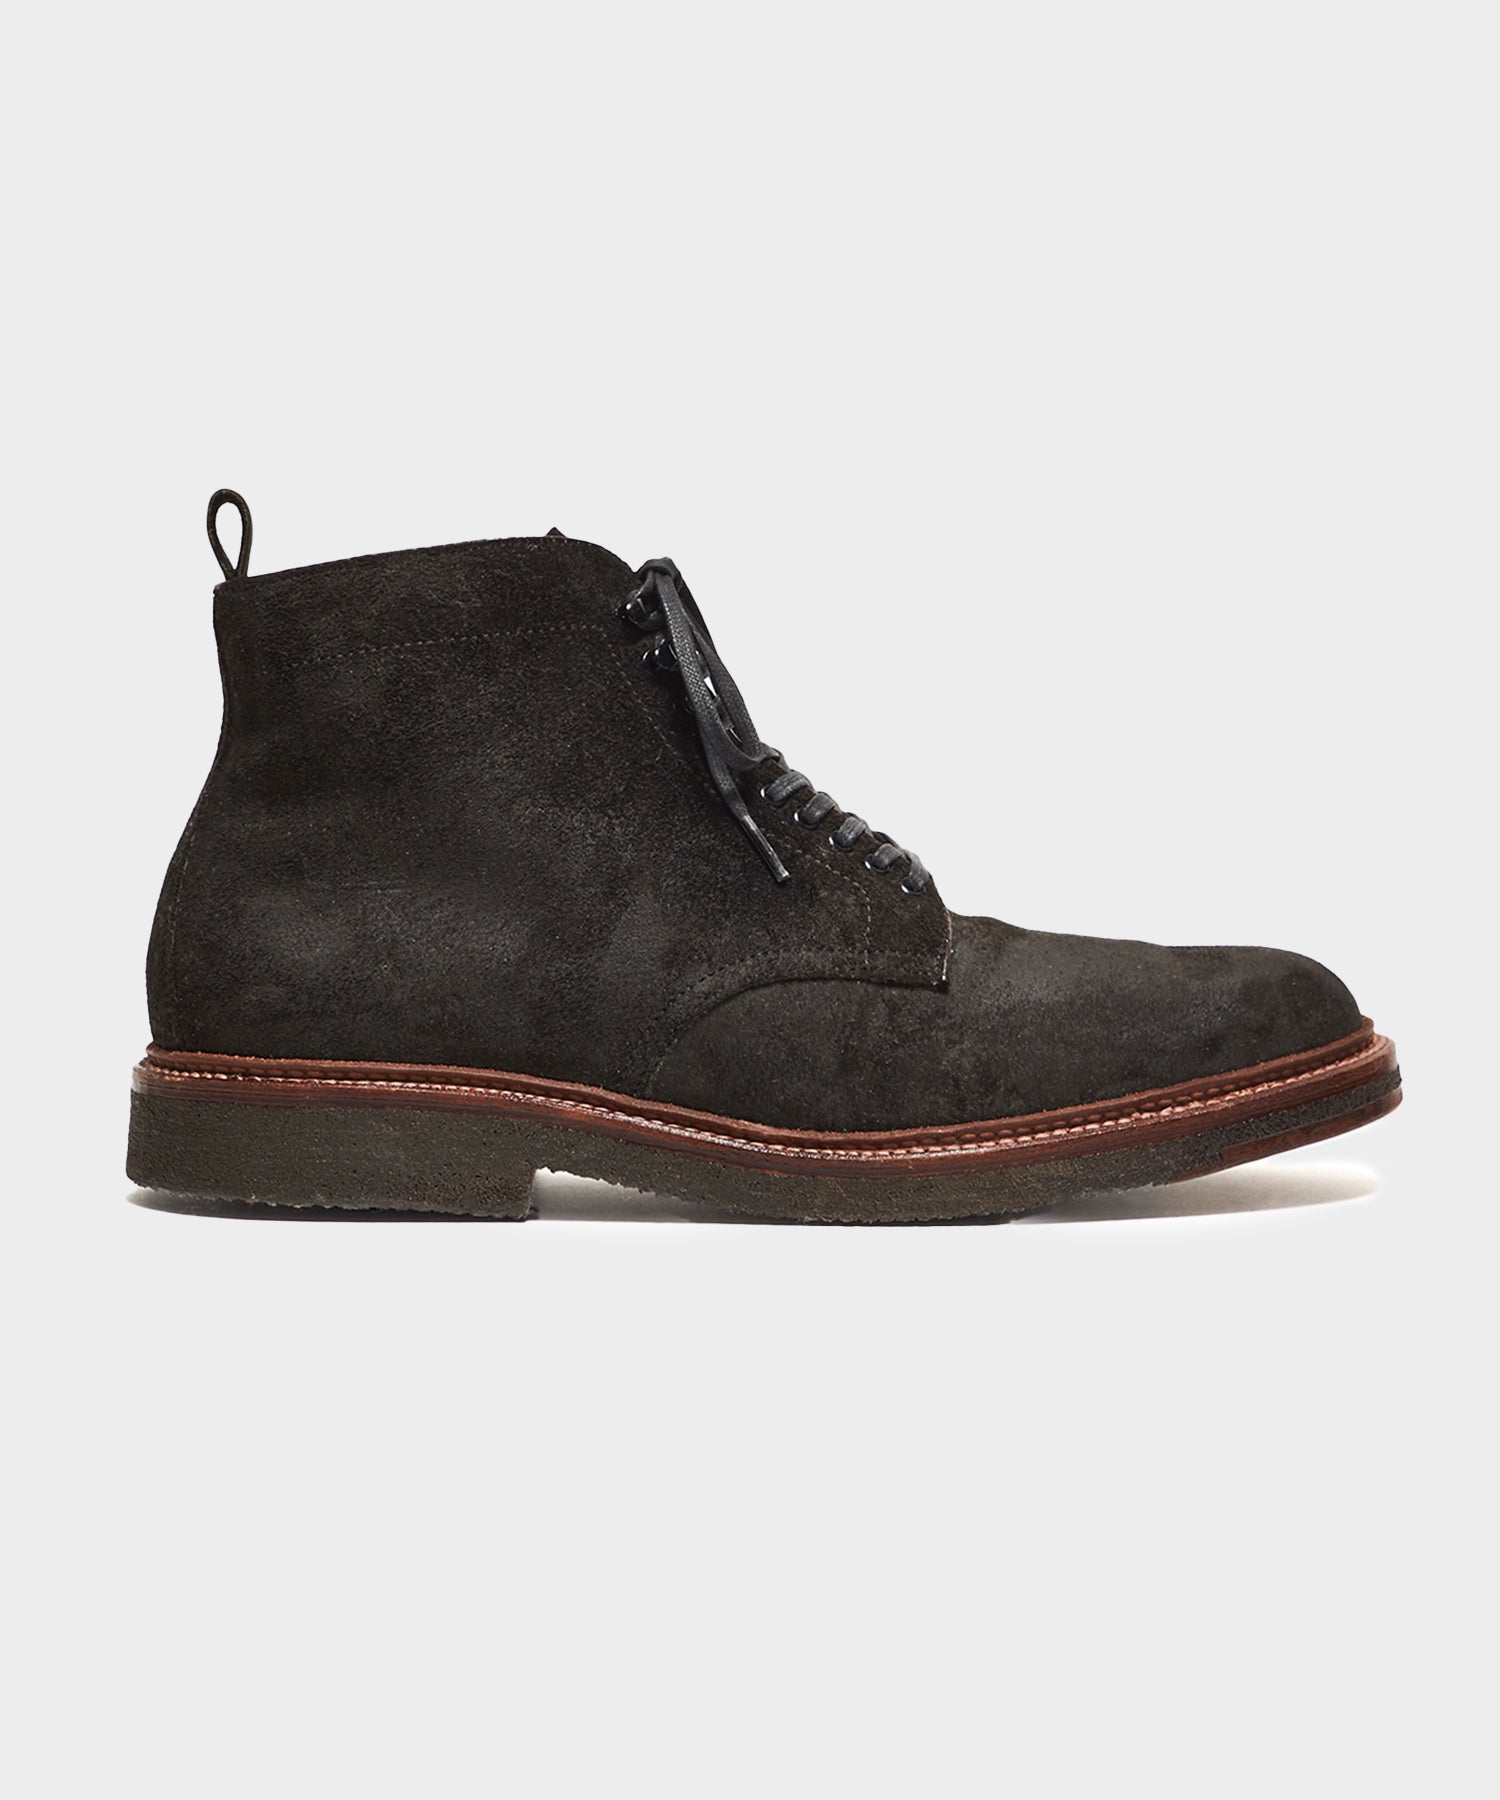 Todd Snyder + Alden Indy Boot in Reverse Earth Chamois